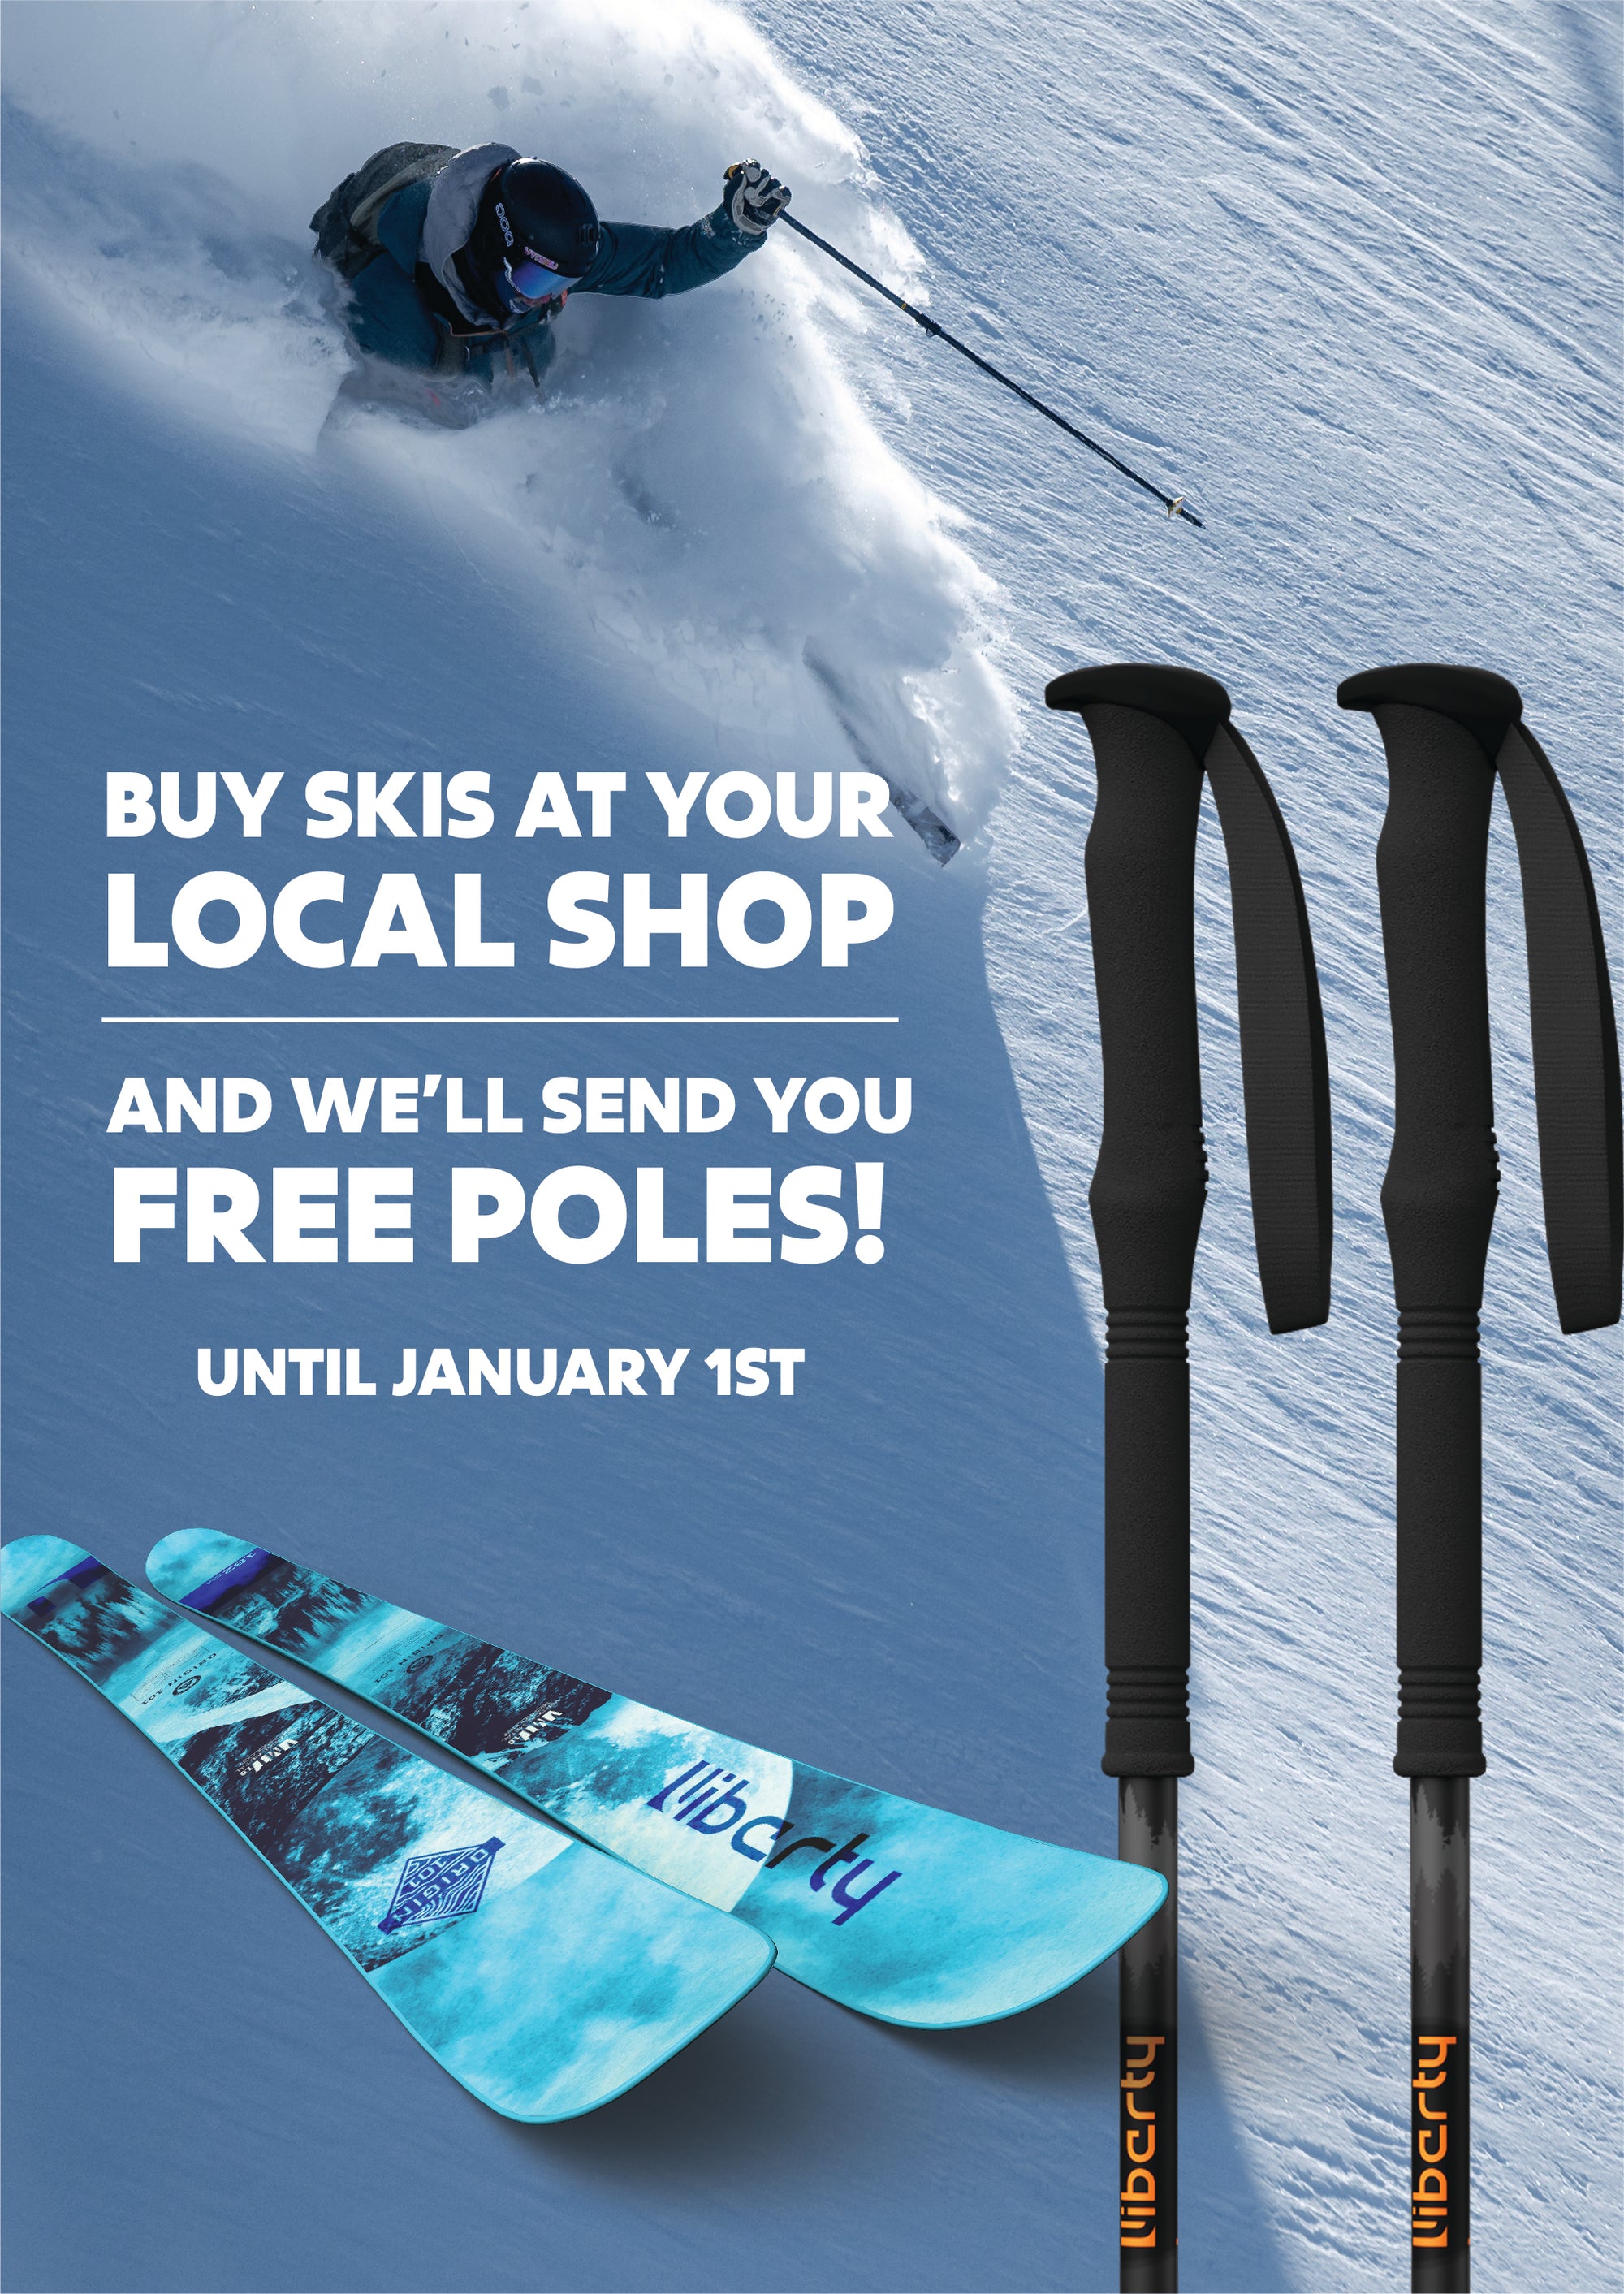 Buy Skis Locally, Get Free Poles